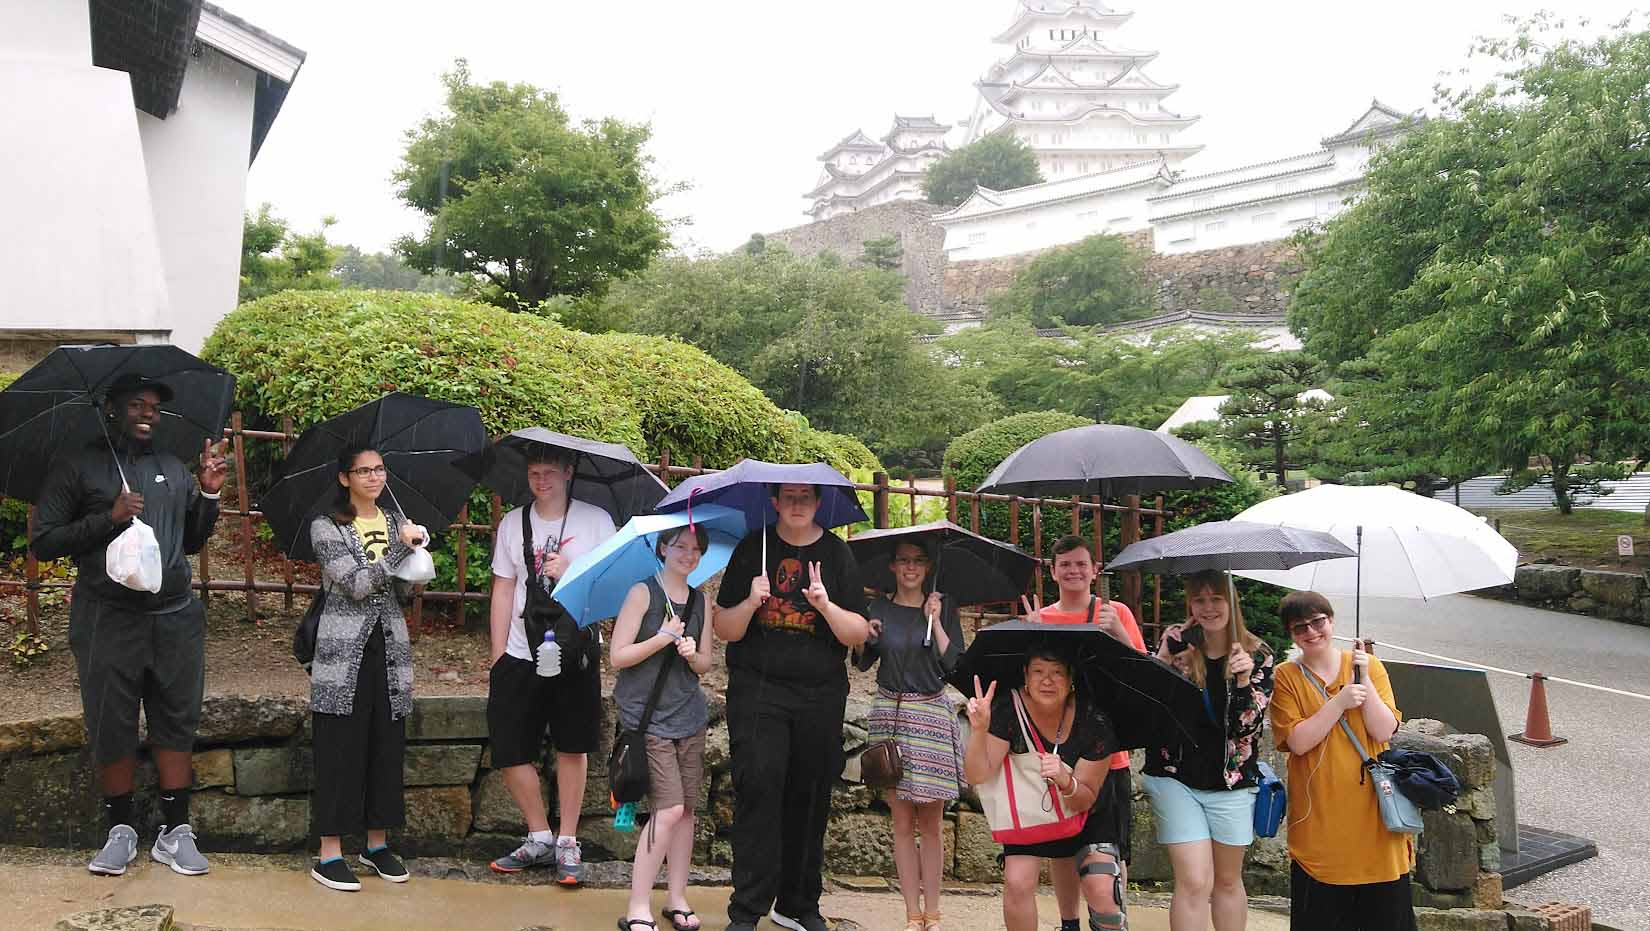 Students in the rain with umbrellas